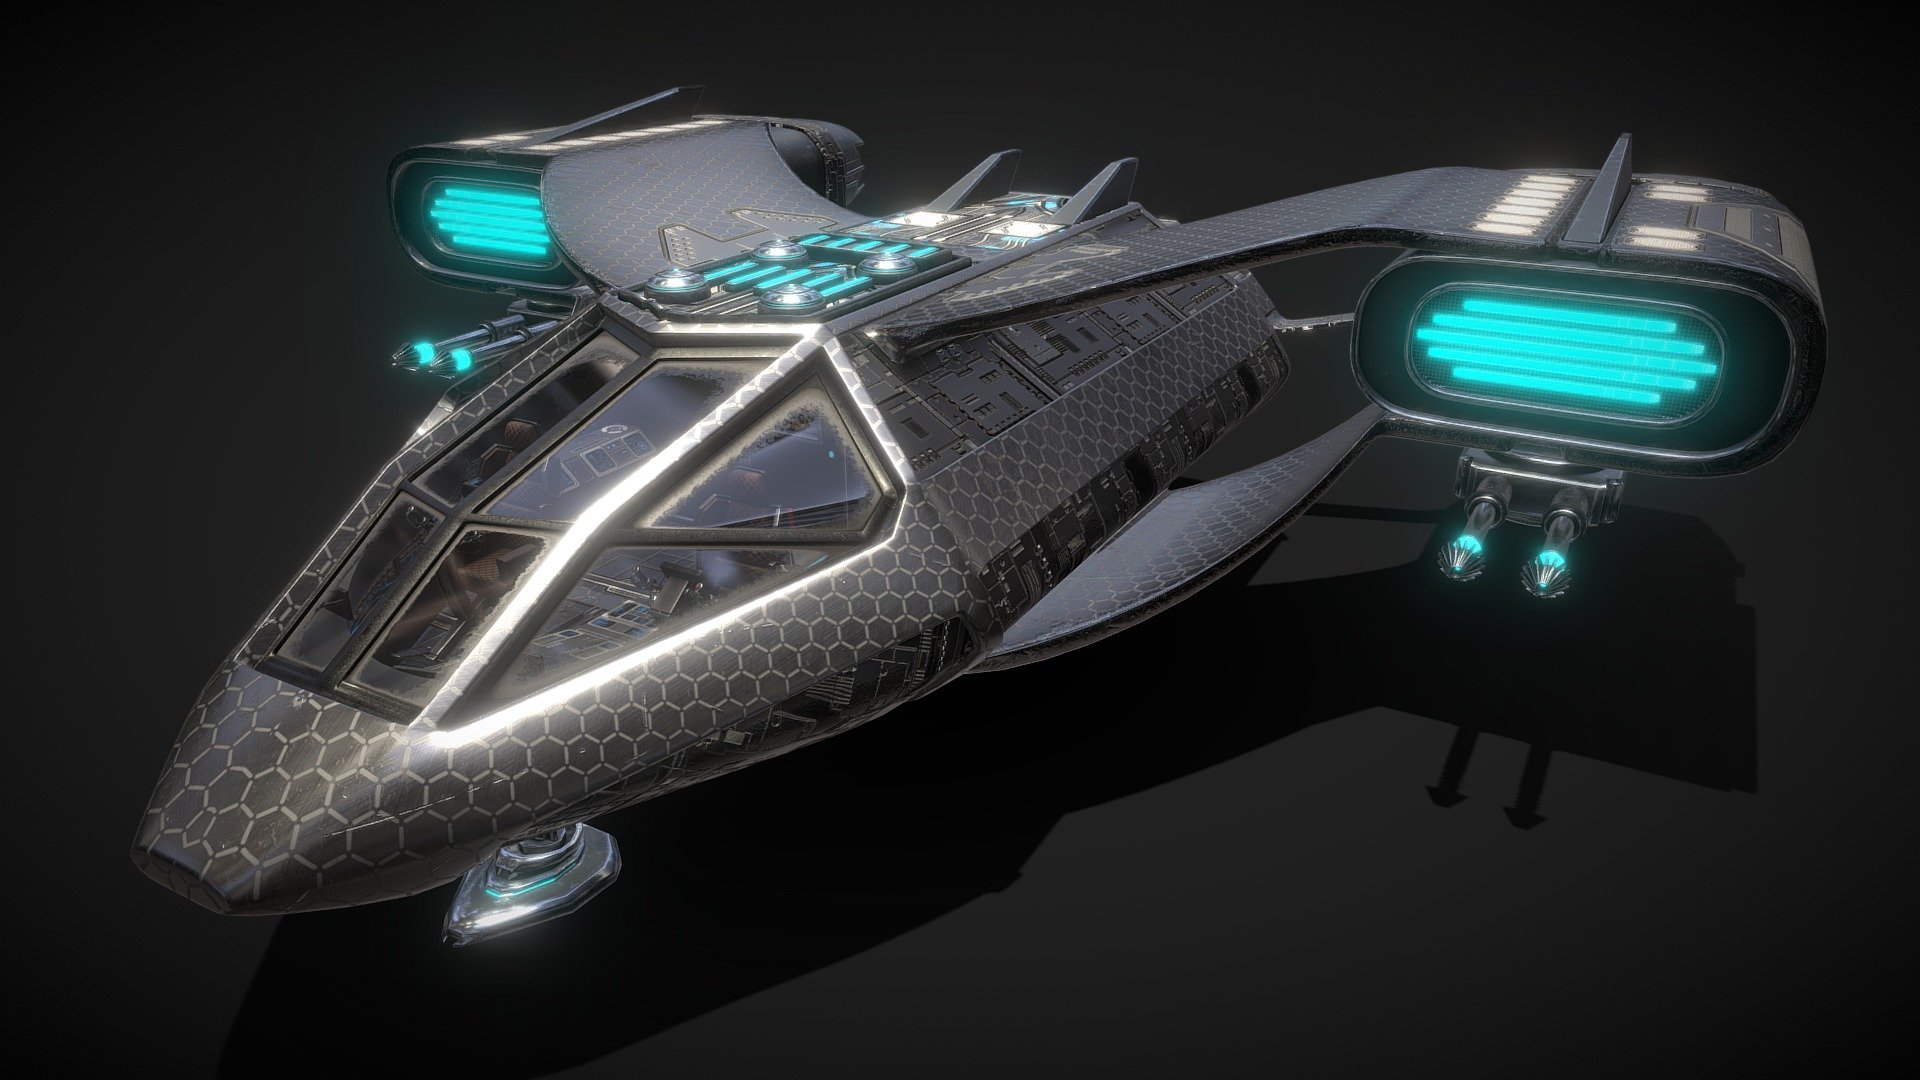 A Spaceship/Spacefigter with a cockpit and a ship´s hold.

The Bonus are that 3 other models included:

*In the Cockpit you get my SCIFI pilot seat model
https://sketchfab.com/3d-models/scifi-pilot-seat-bb330b958a0b4543874cc8b38e06330a

*In the hold you get my  Laserrifle- and my SCIFI Crate model
https://sketchfab.com/3d-models/laserrifle-82dcc3953e1d44d5b8d105c62c6cd6b7
https://sketchfab.com/3d-models/scifi-crate-4251310f78c1465581117265eb83b582

The Ship itself has 72.205 Faces
5 Texture sets in 4k except of the glas with an 1k and the little parts with 2k

I made the model so that a normal or a very large person (e.g. alien) has enough space in it if you want to use it in a game

modelled in Blender and textured in Substance Painter - Spaceship with Cockpit, Interior and Bonus - Buy Royalty Free 3D model by Demonic Arts (@Jesterz86) 3d model